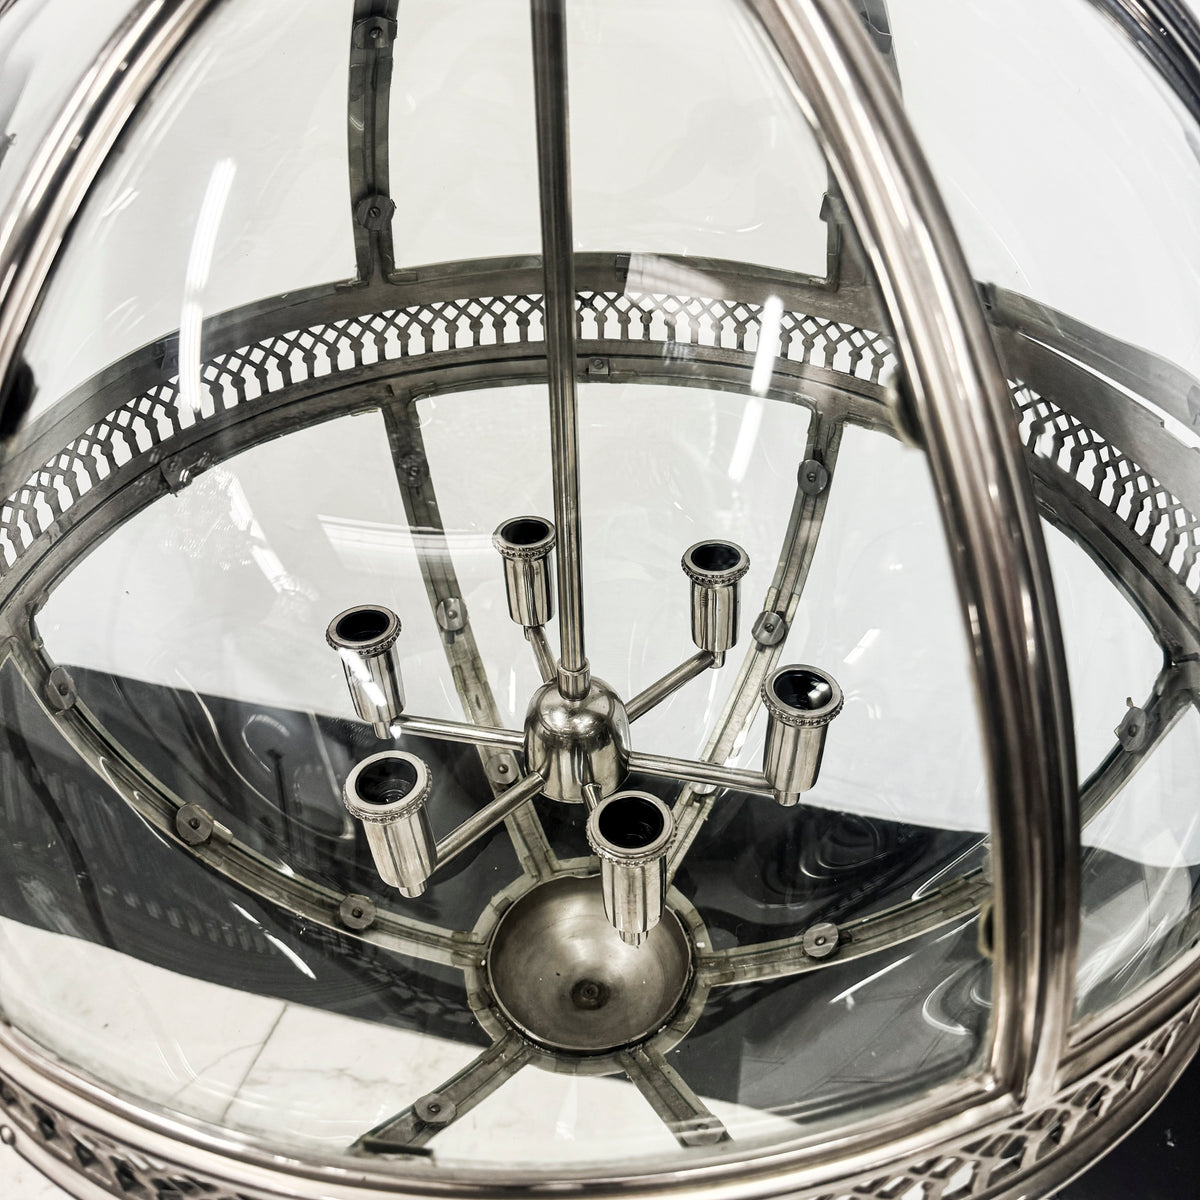 Antique Polished Steel Sphere Globe Pendant Light | The Architectural Forum